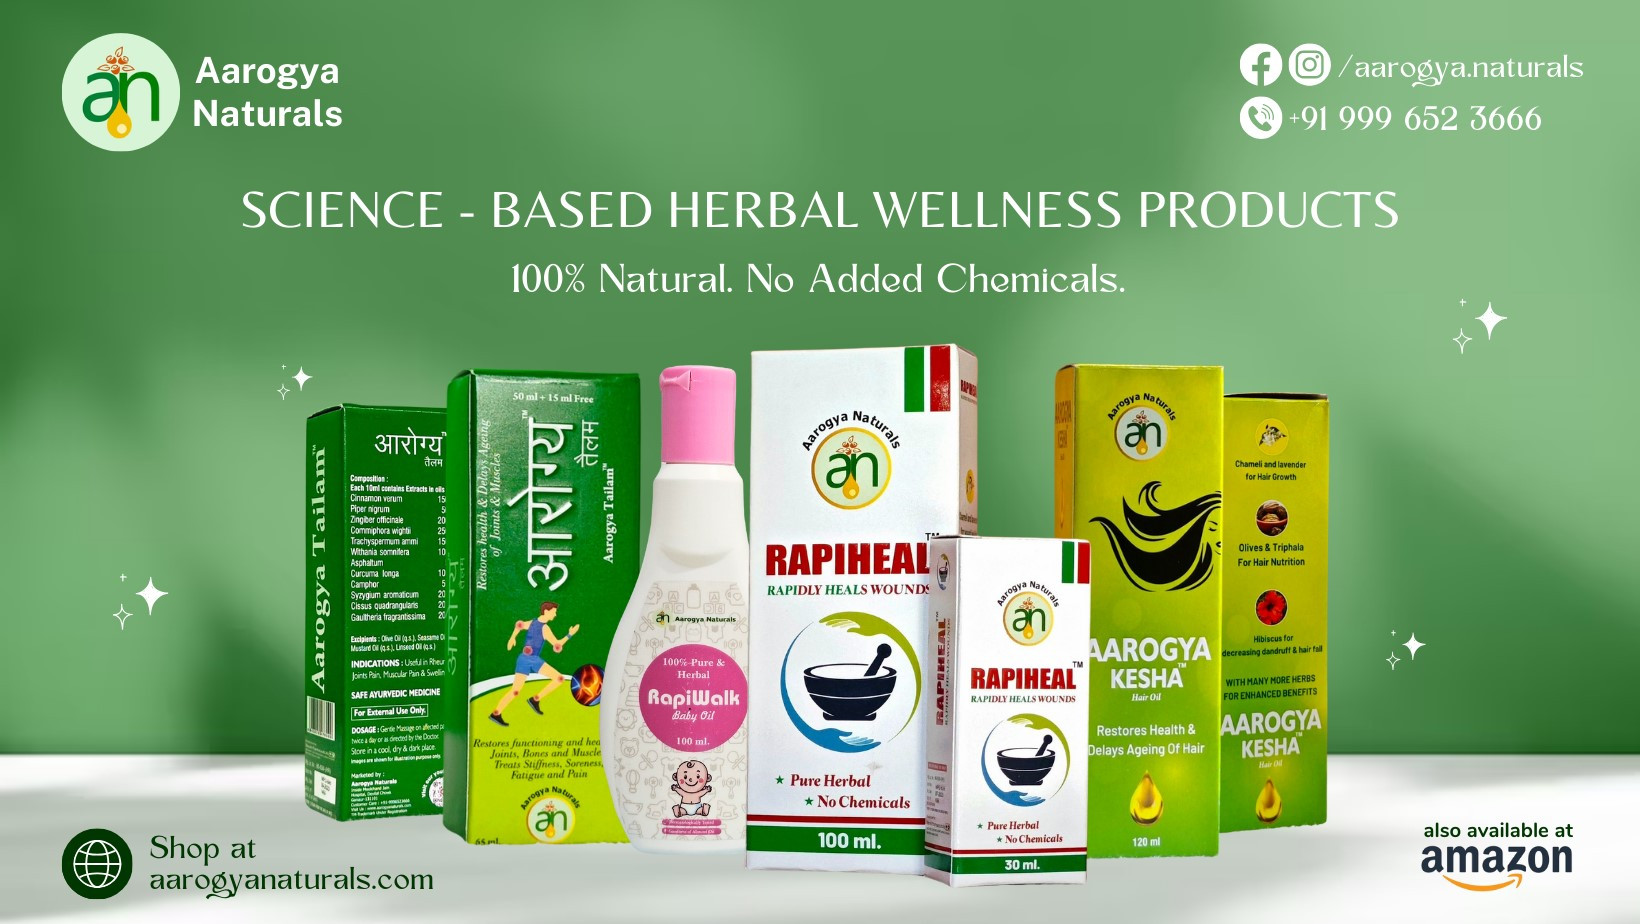 Aarogya Naturals | Science-Based All-Natural Health and Wellness Products